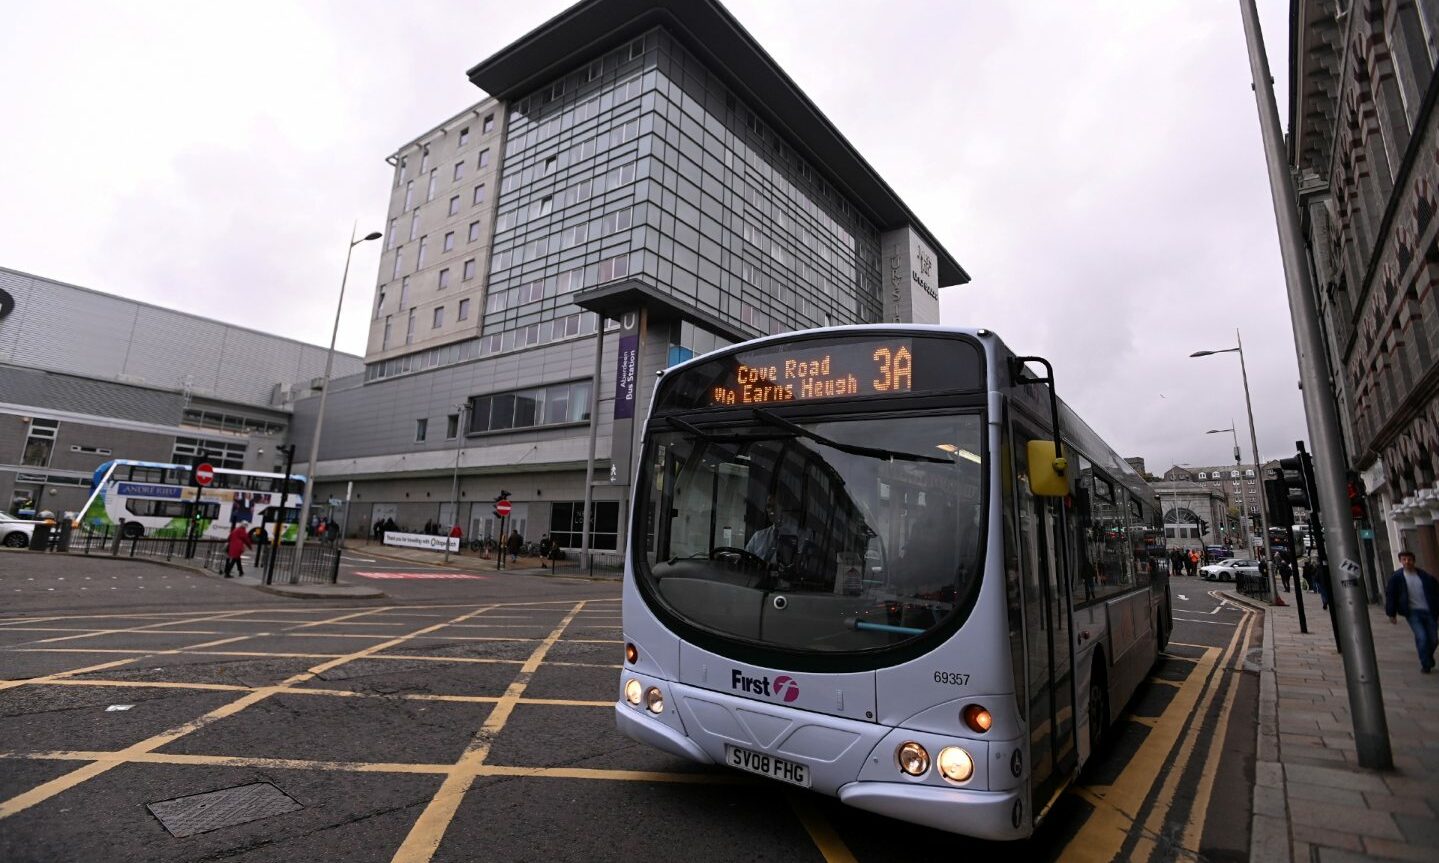 First Bus could look at lowering ticket prices if the Aberdeen bus gates are a success. Image: Darrell Benns/DC Thomson